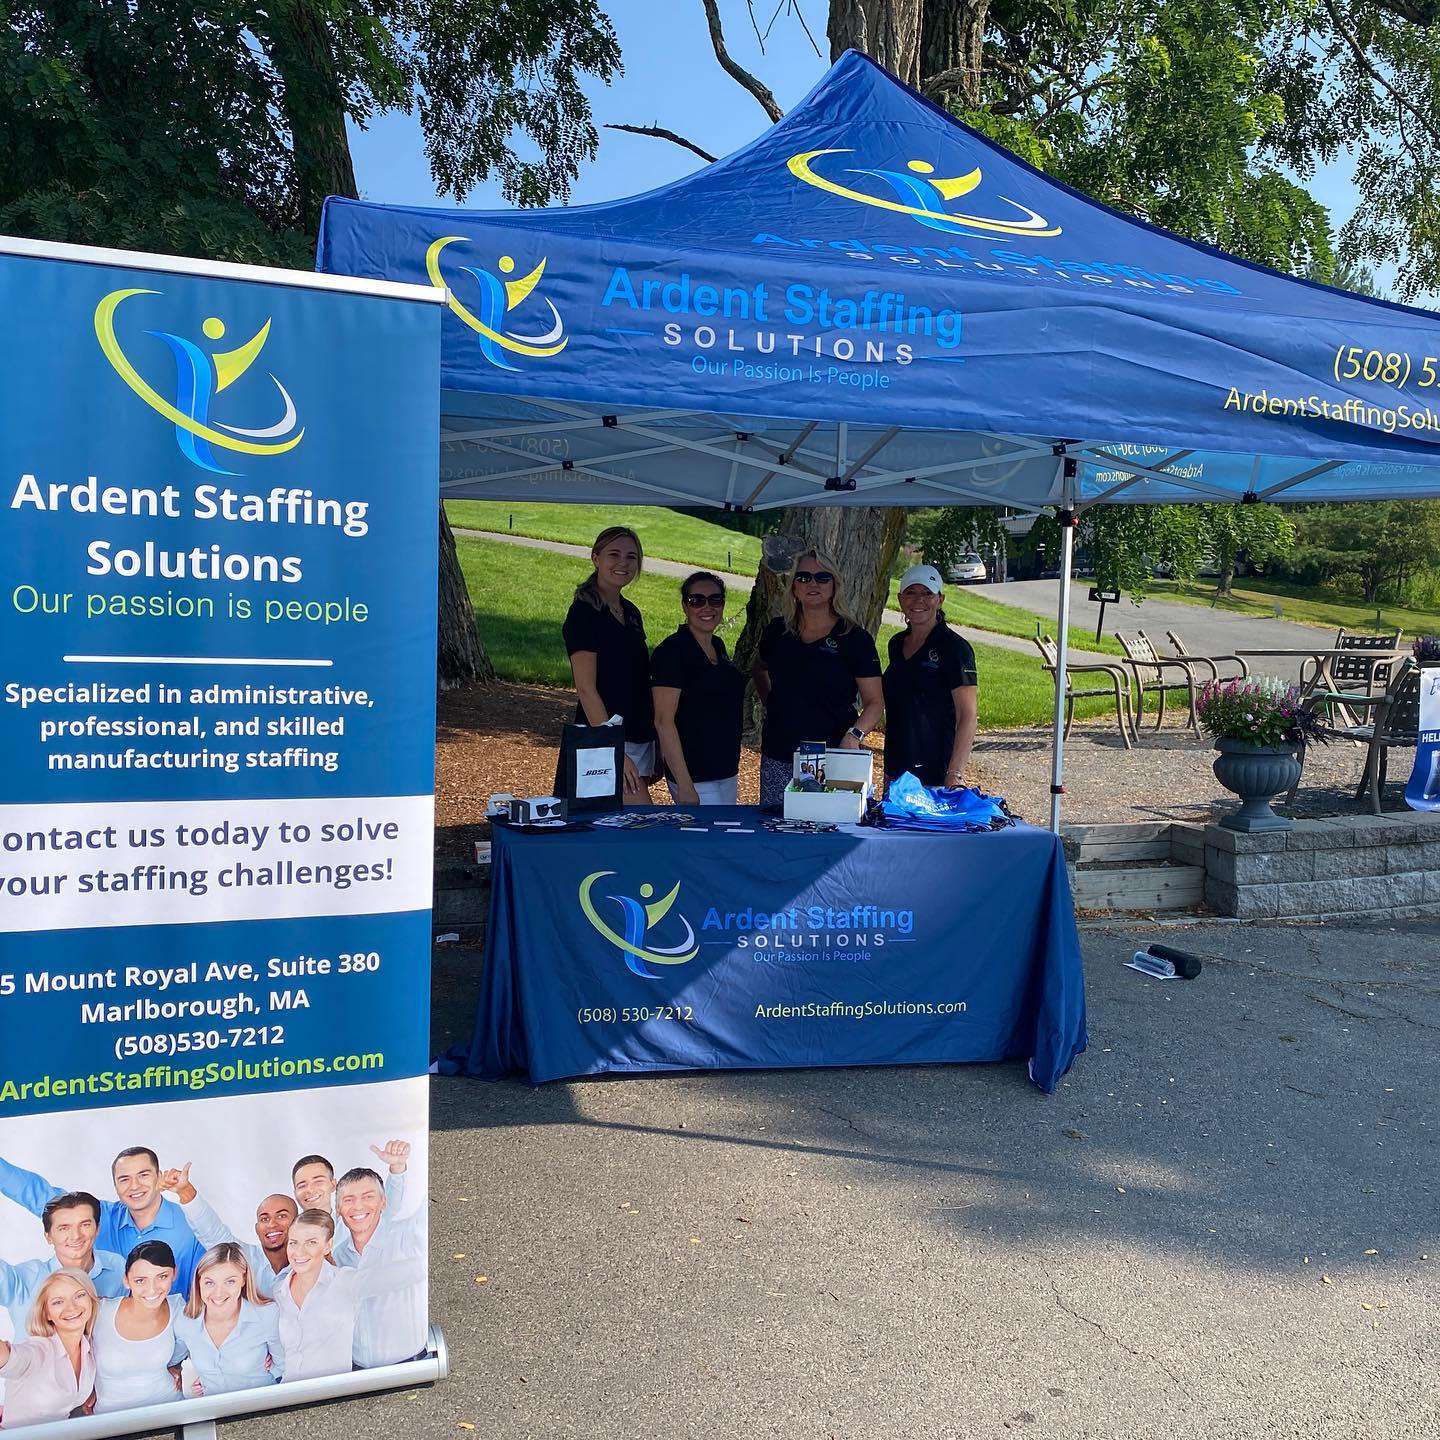 Such a great day for the @marlboroughchamber tourney!  Enter to win a pair of Bose Frames sunglasses or an Ardent Staffing Yeti!
Stop by our booth